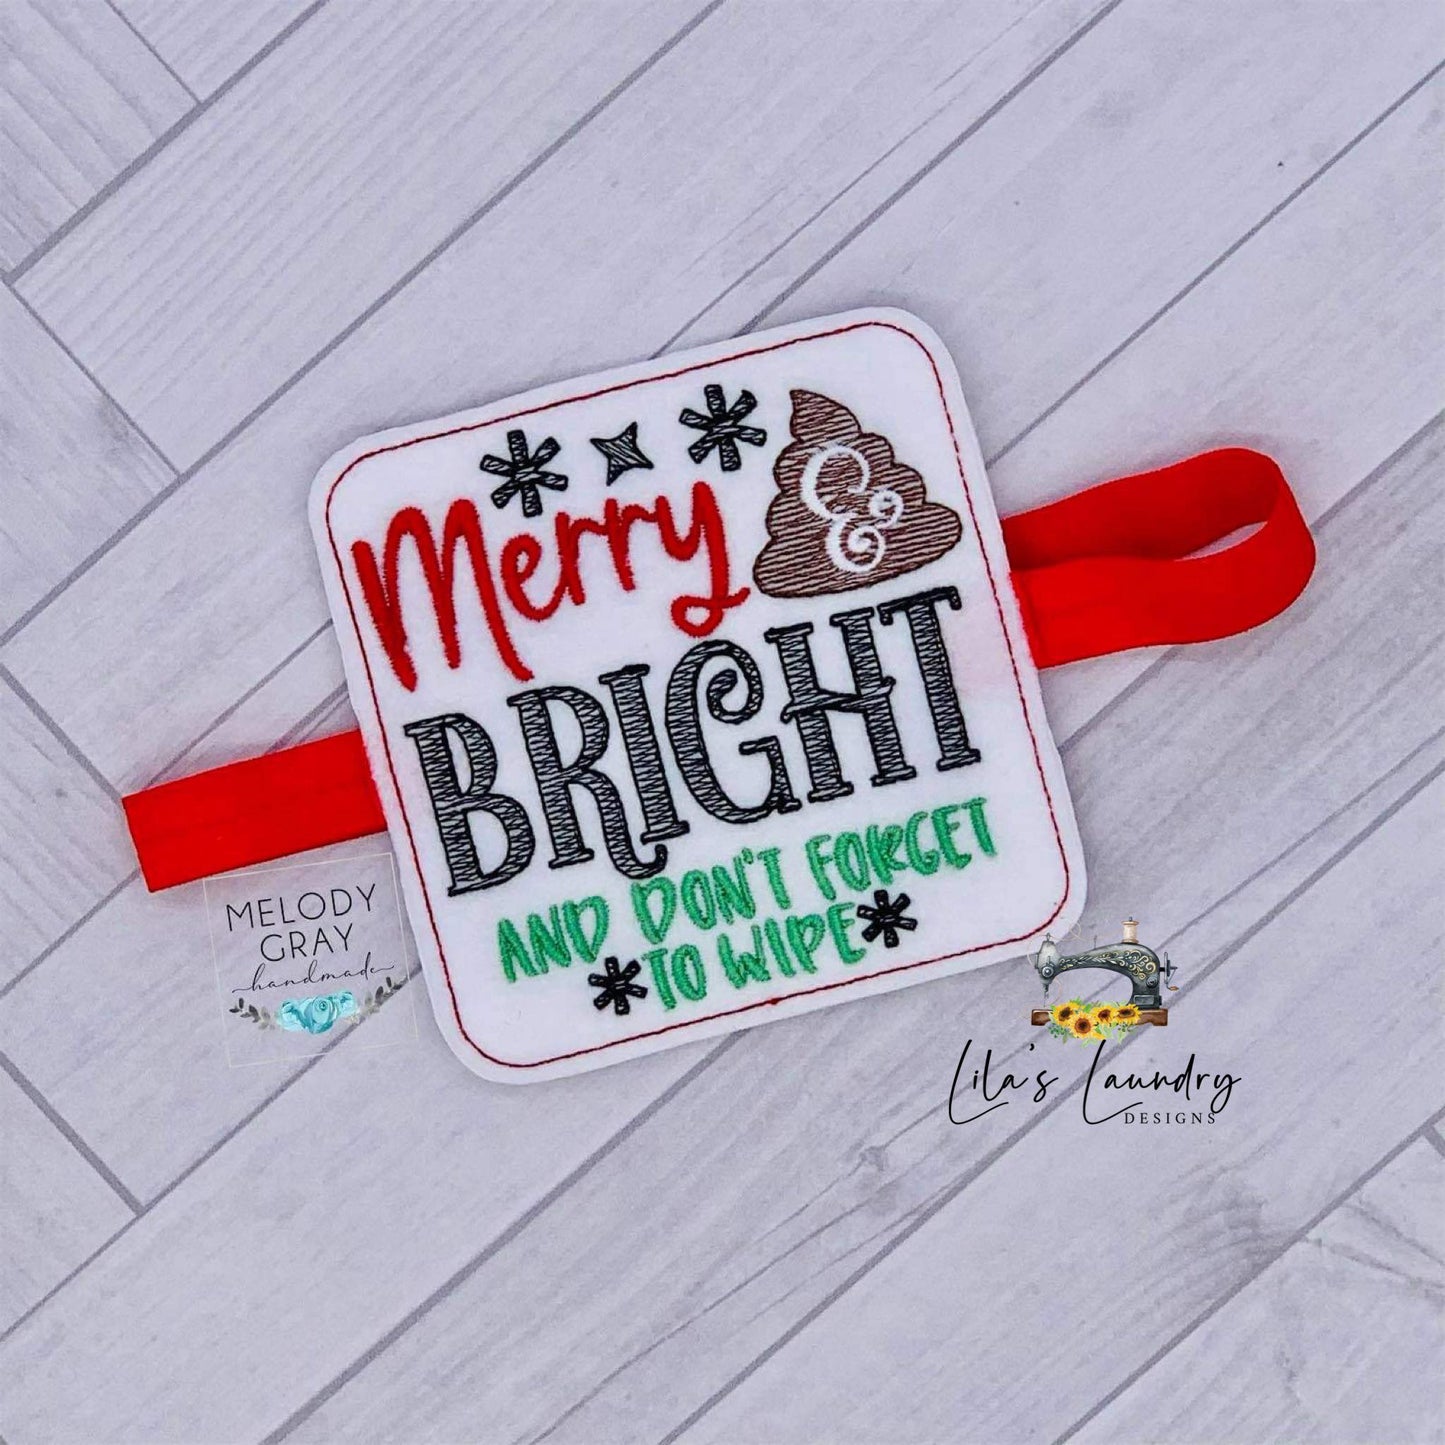 Merry & Bright - TP tie 4x4 - DIGITAL Embroidery DESIGN